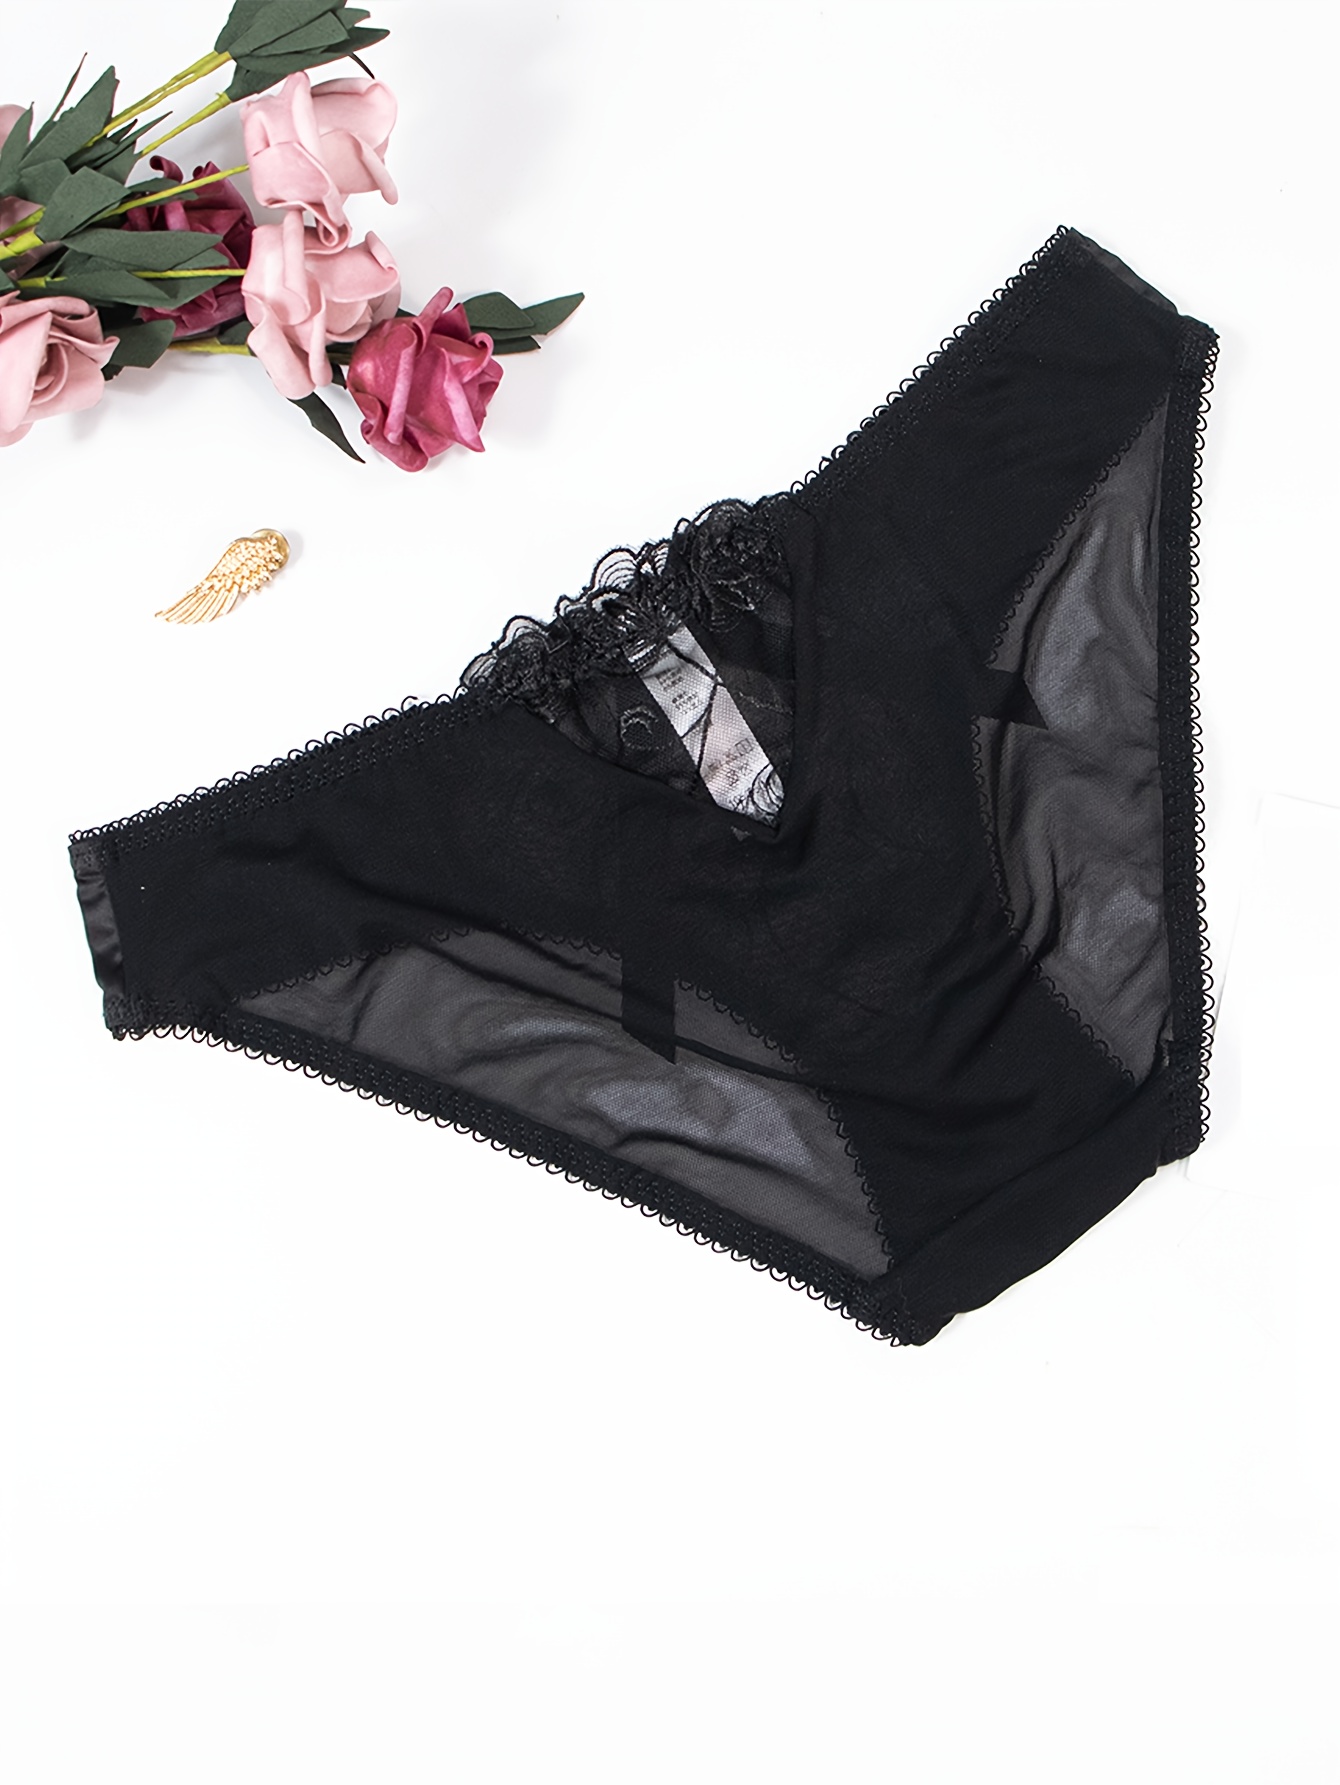 Varsbaby Sexy Floral Lace Low-rise Thongs Breathable Underwear